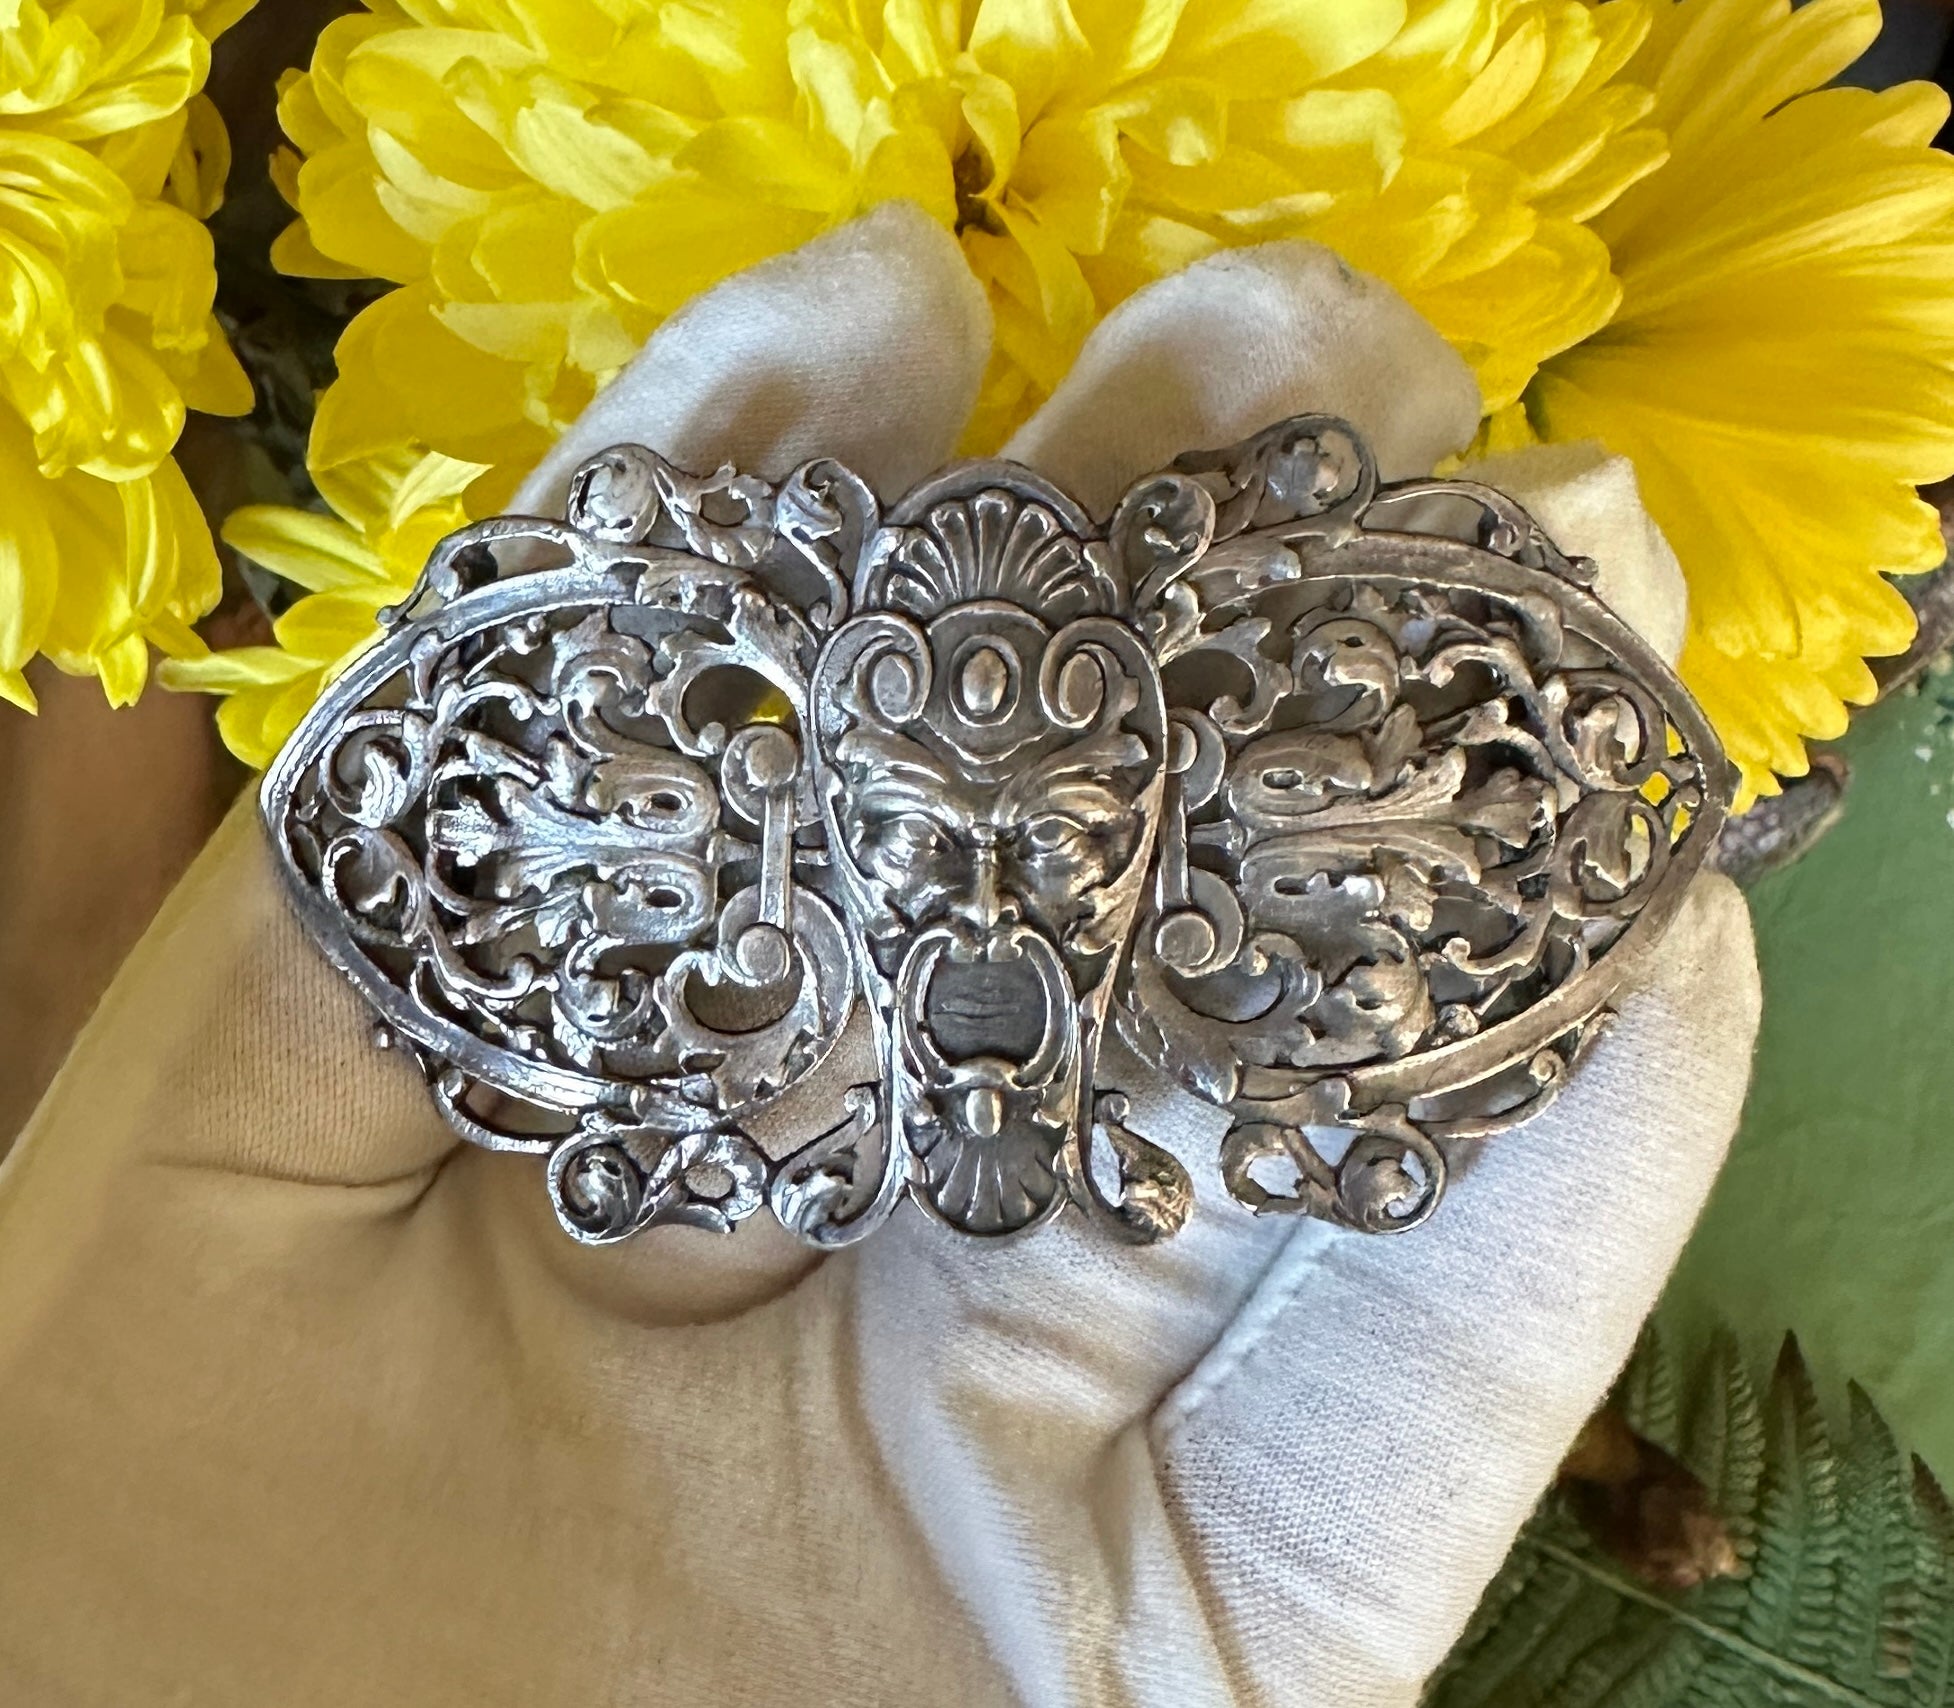 This is a stunning and rare antique Belle Epoque Buckle in Sterling Silver with a Gargoyle, God or Grotesque Imagery with acanthus leaf designs throughout.  The Gargoyle face is surrounded by open work foliate acanthus motifs.   The very unusual and